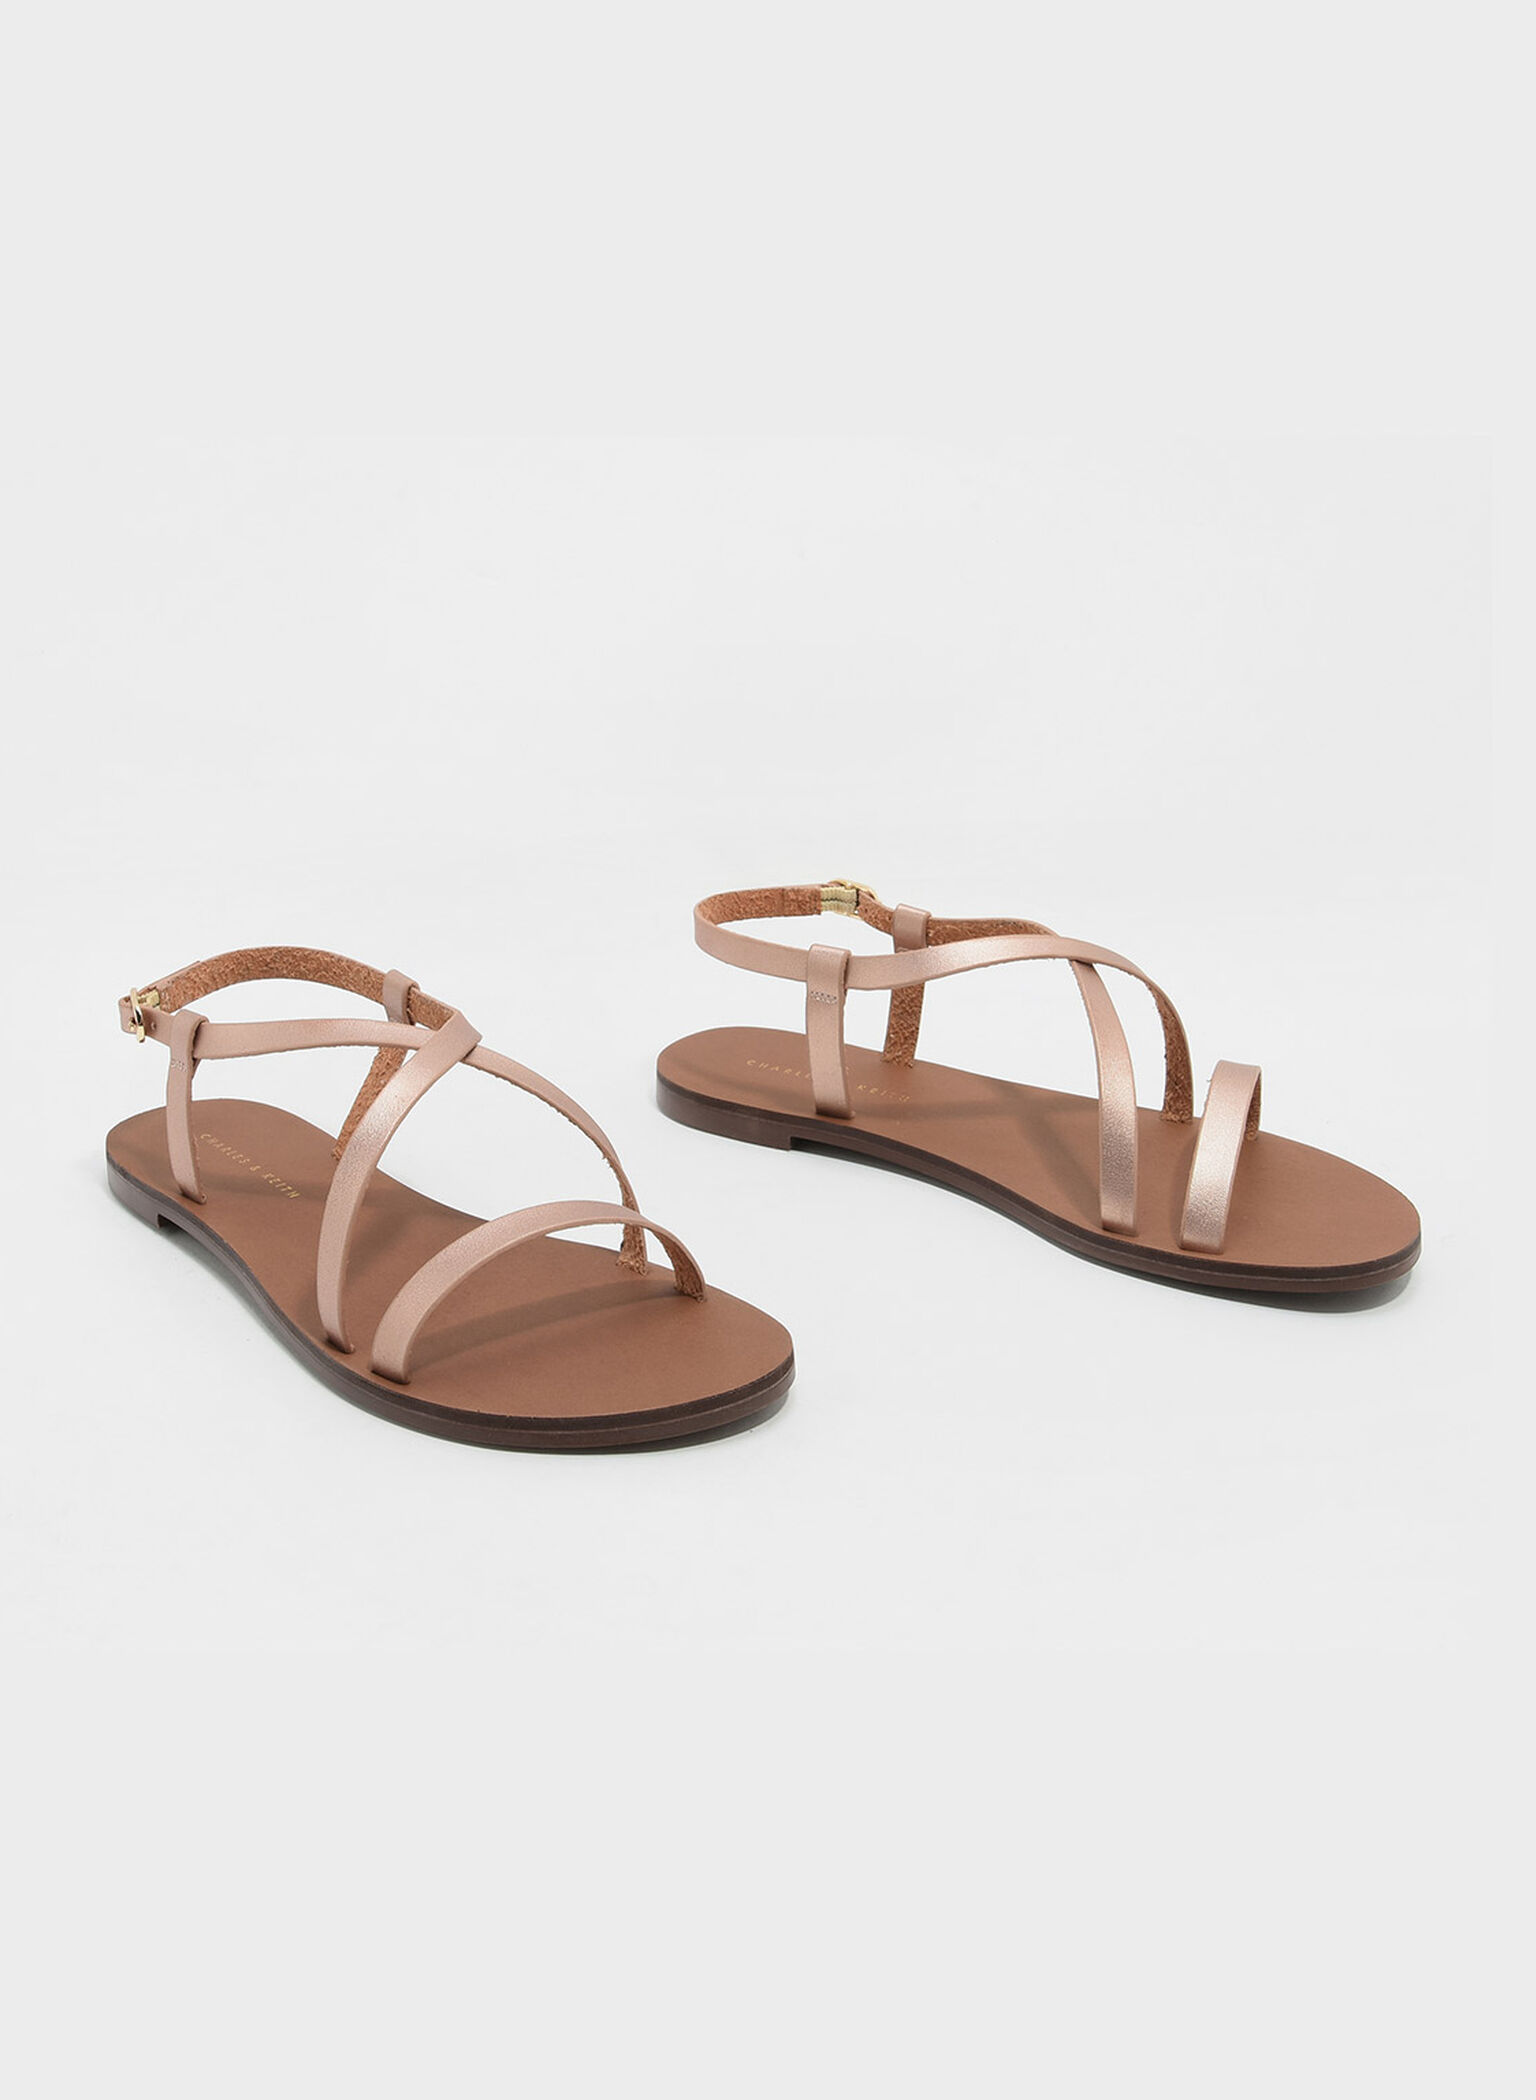 Rose Gold Criss Cross Sandals - CHARLES & KEITH SG